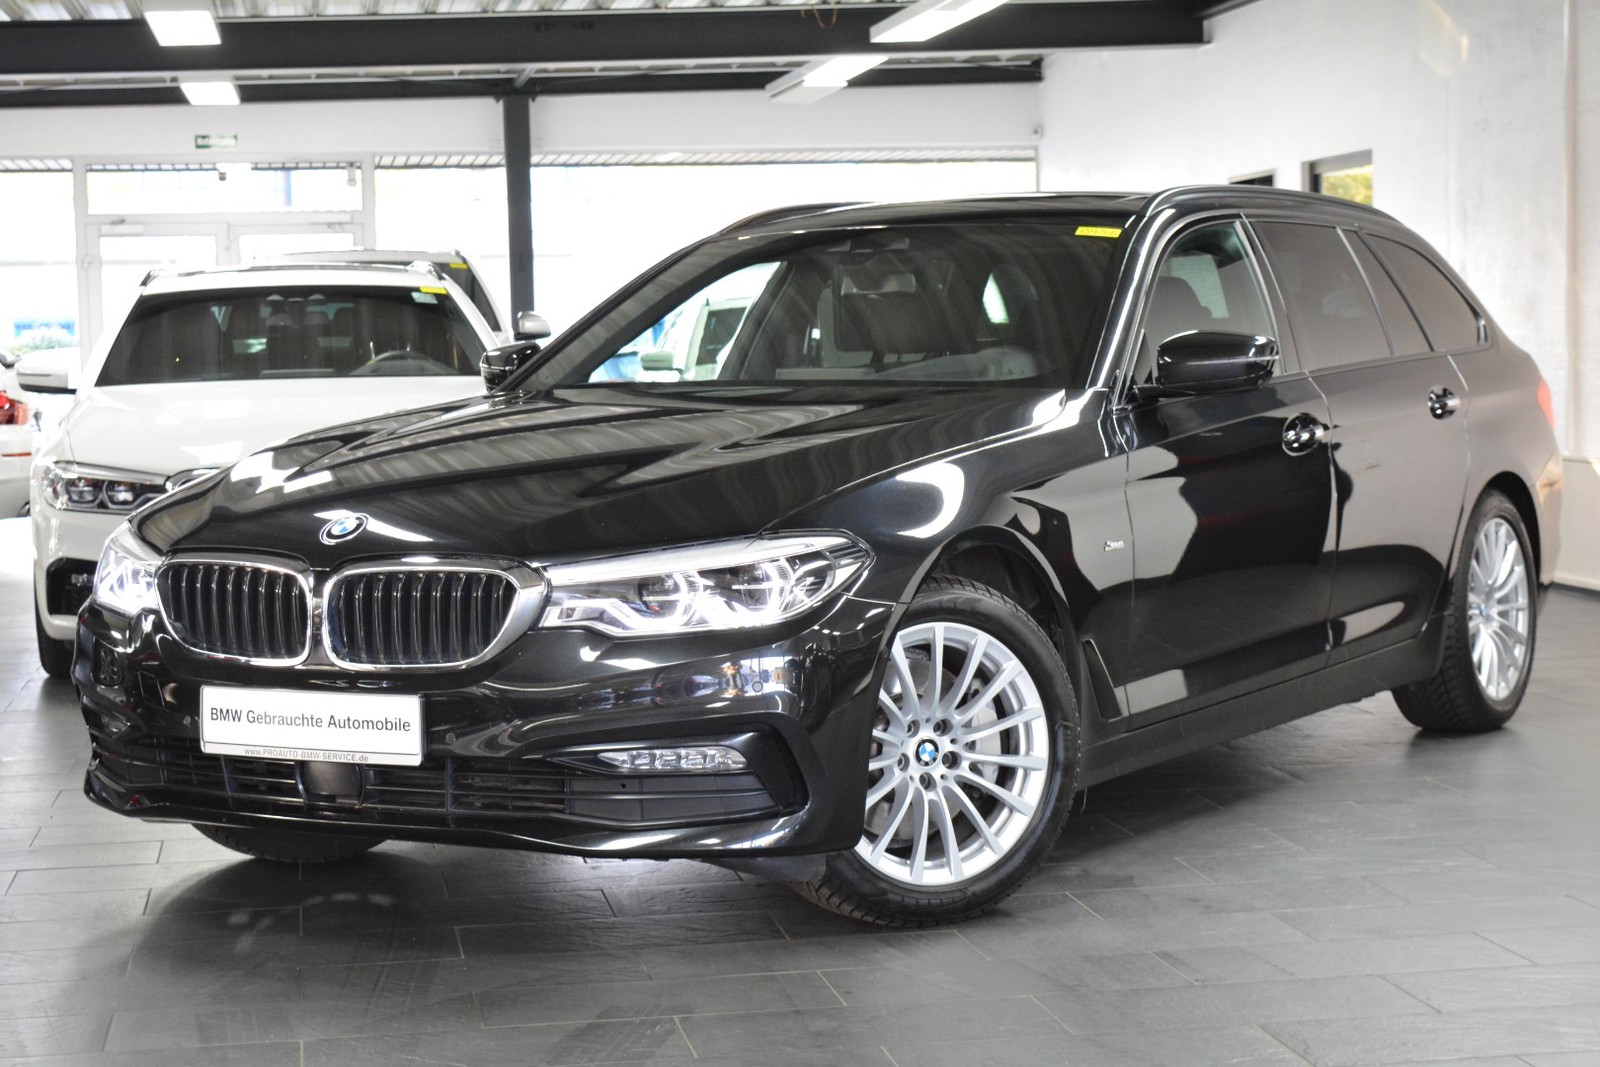 Bmw 530 I Xdrive Touring Aut Sport Line G31 Led Head Up Navi Prof Glasdach Used Buy In Meerbusch Price 43500 Eur Int Nr Meer 0456 Sold